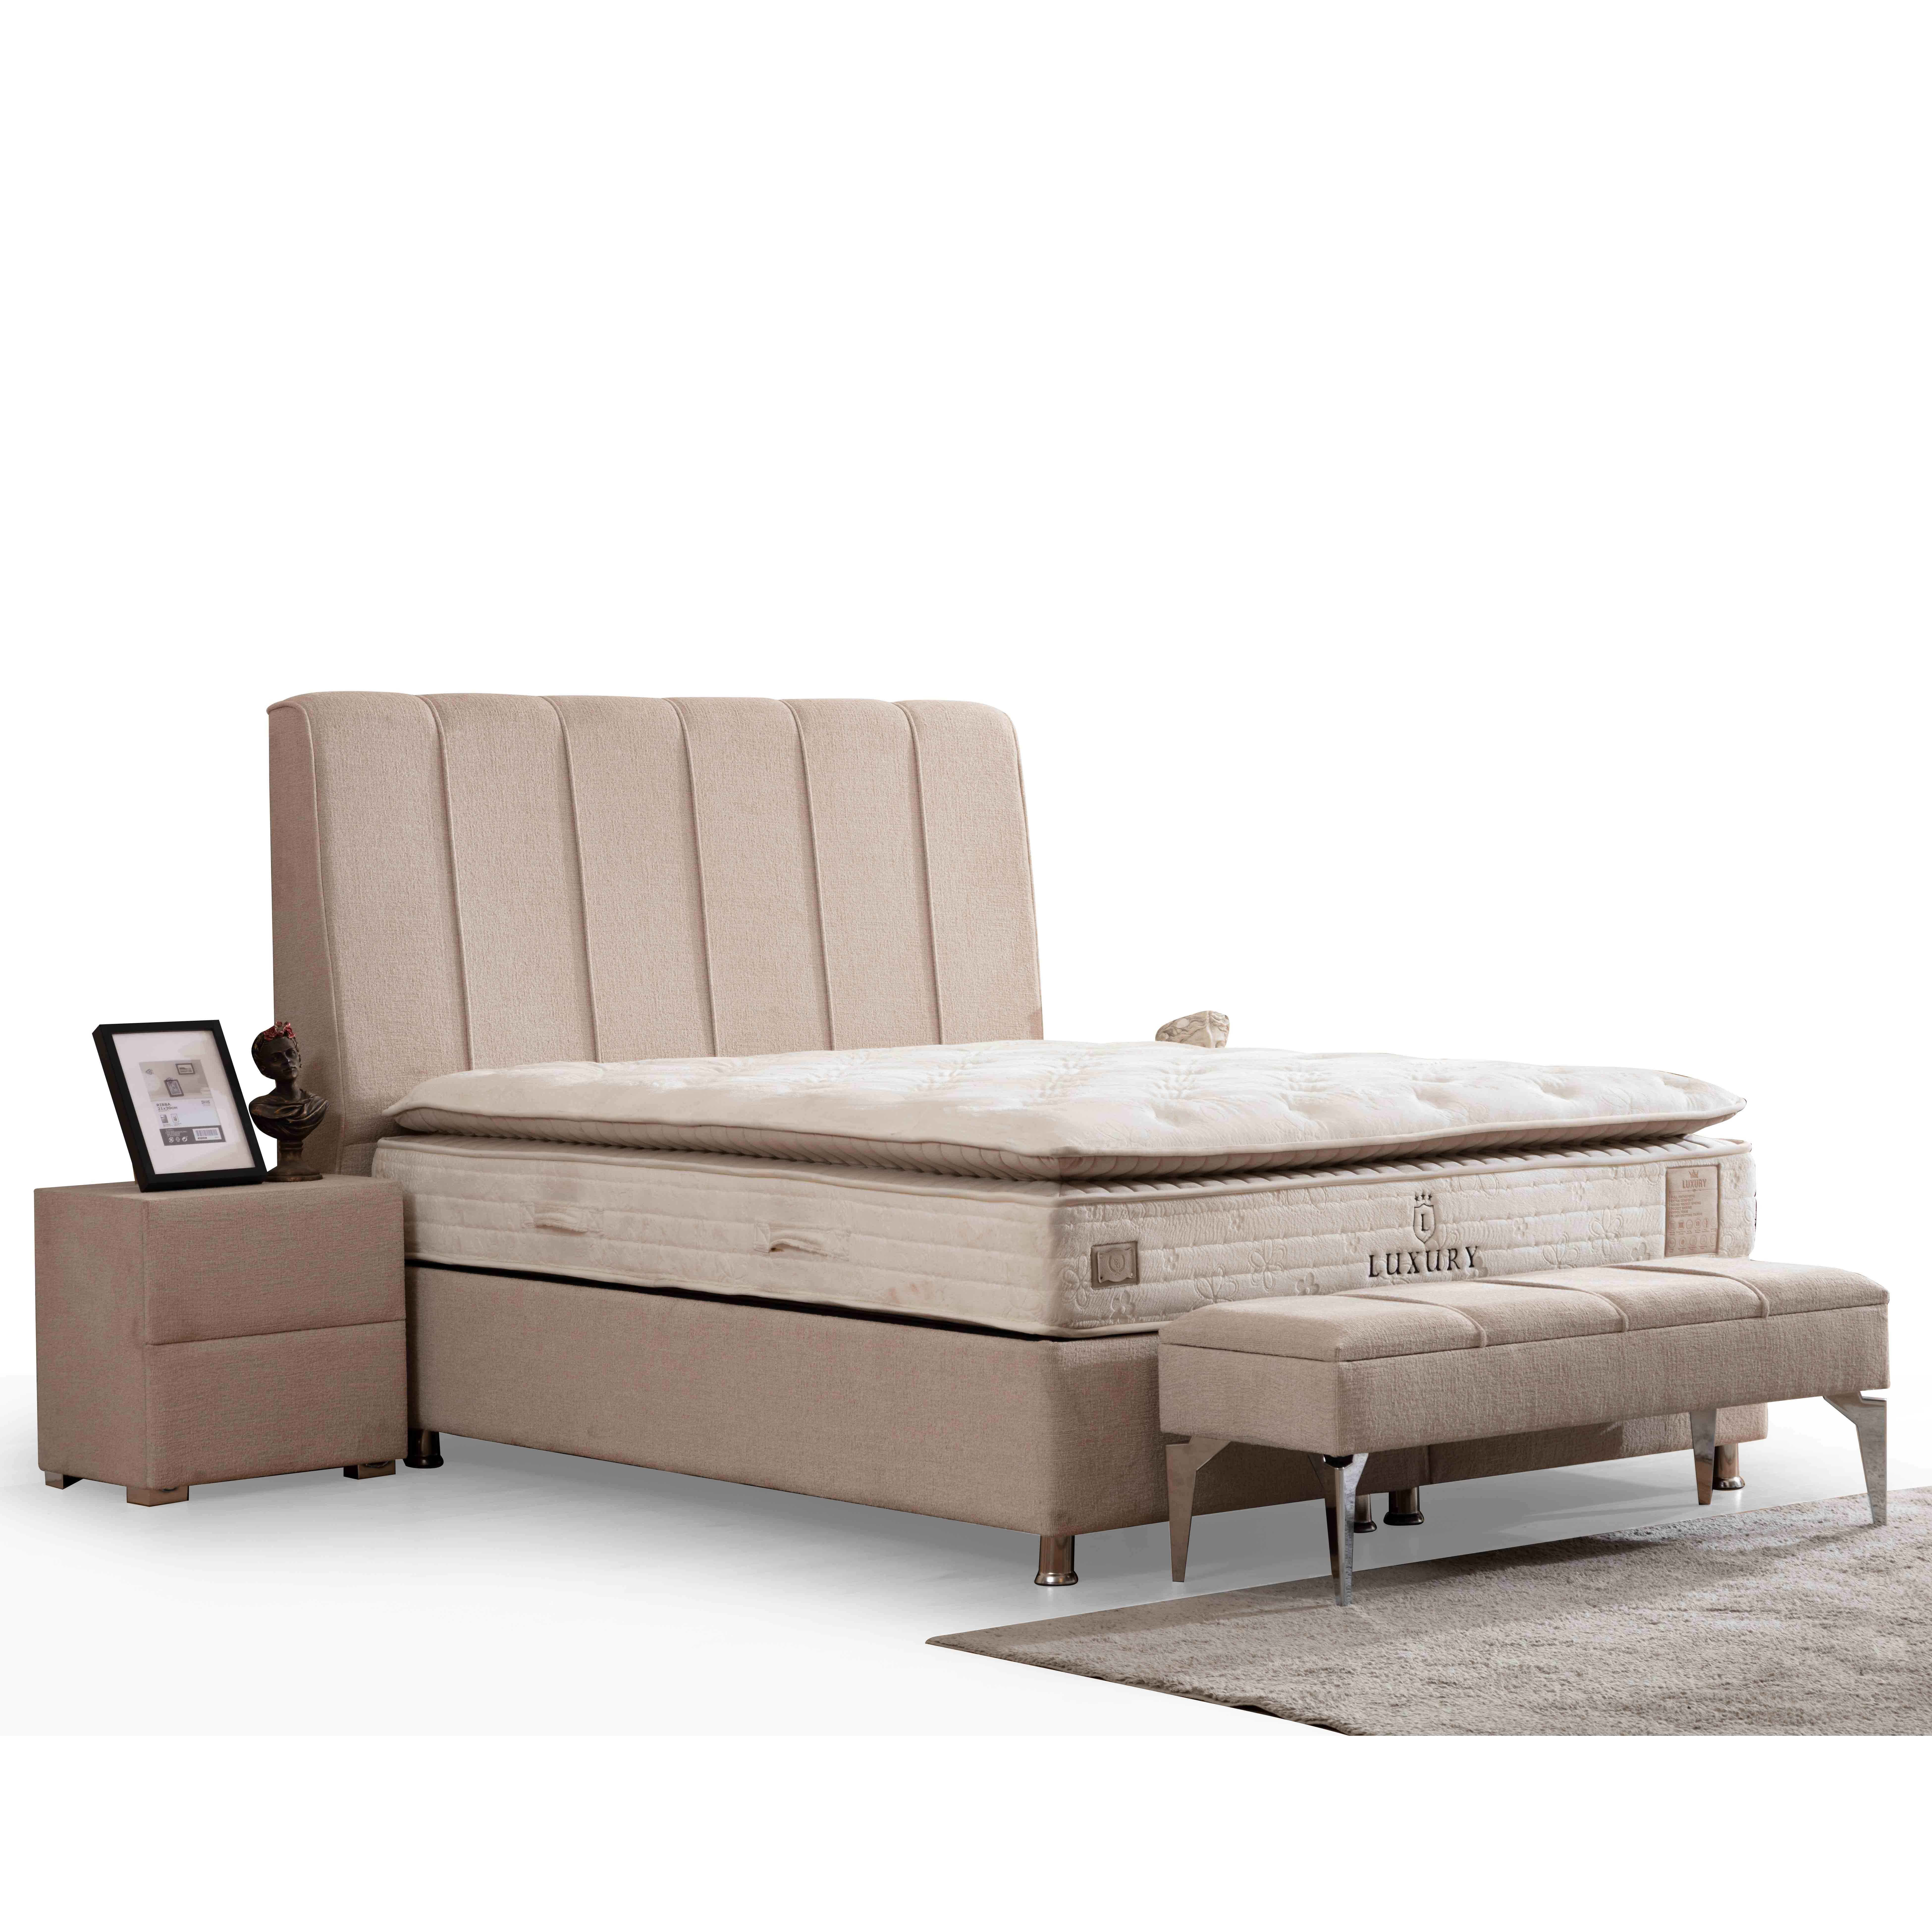 Prime Bed With Storage 90*190